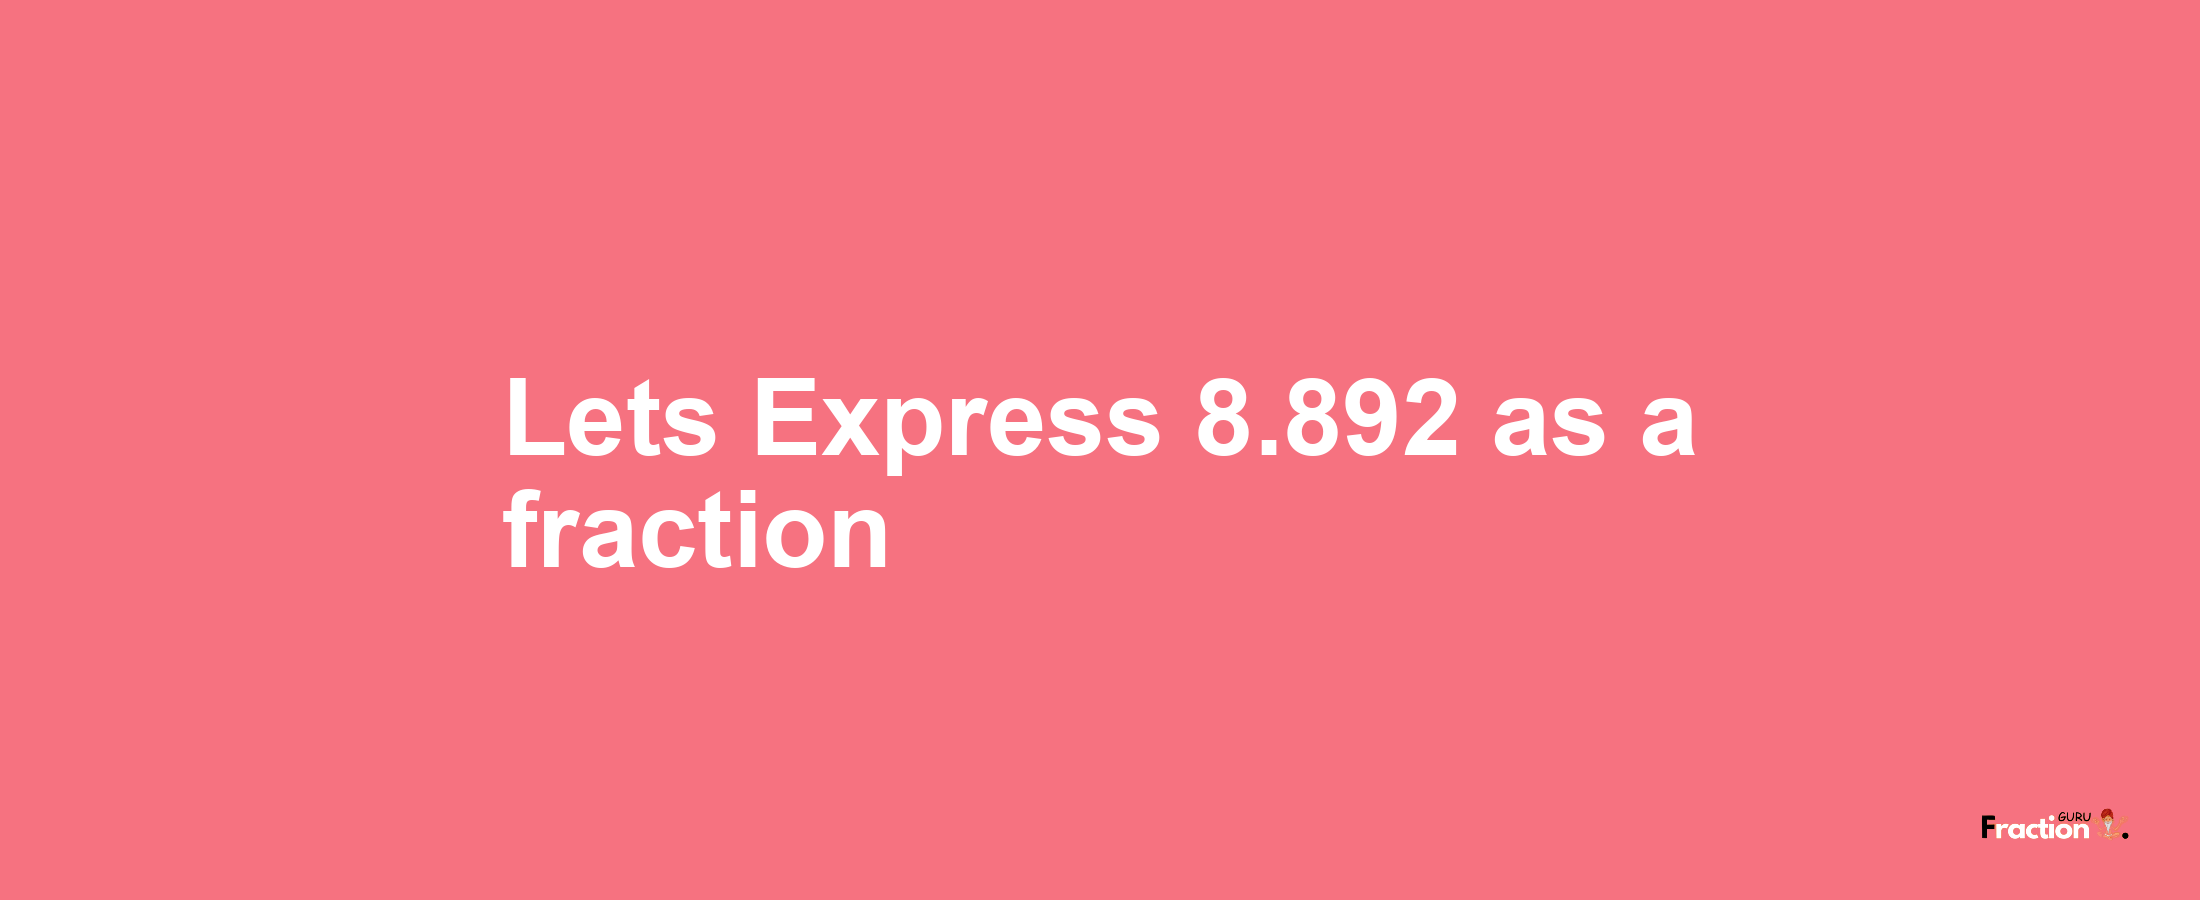 Lets Express 8.892 as afraction